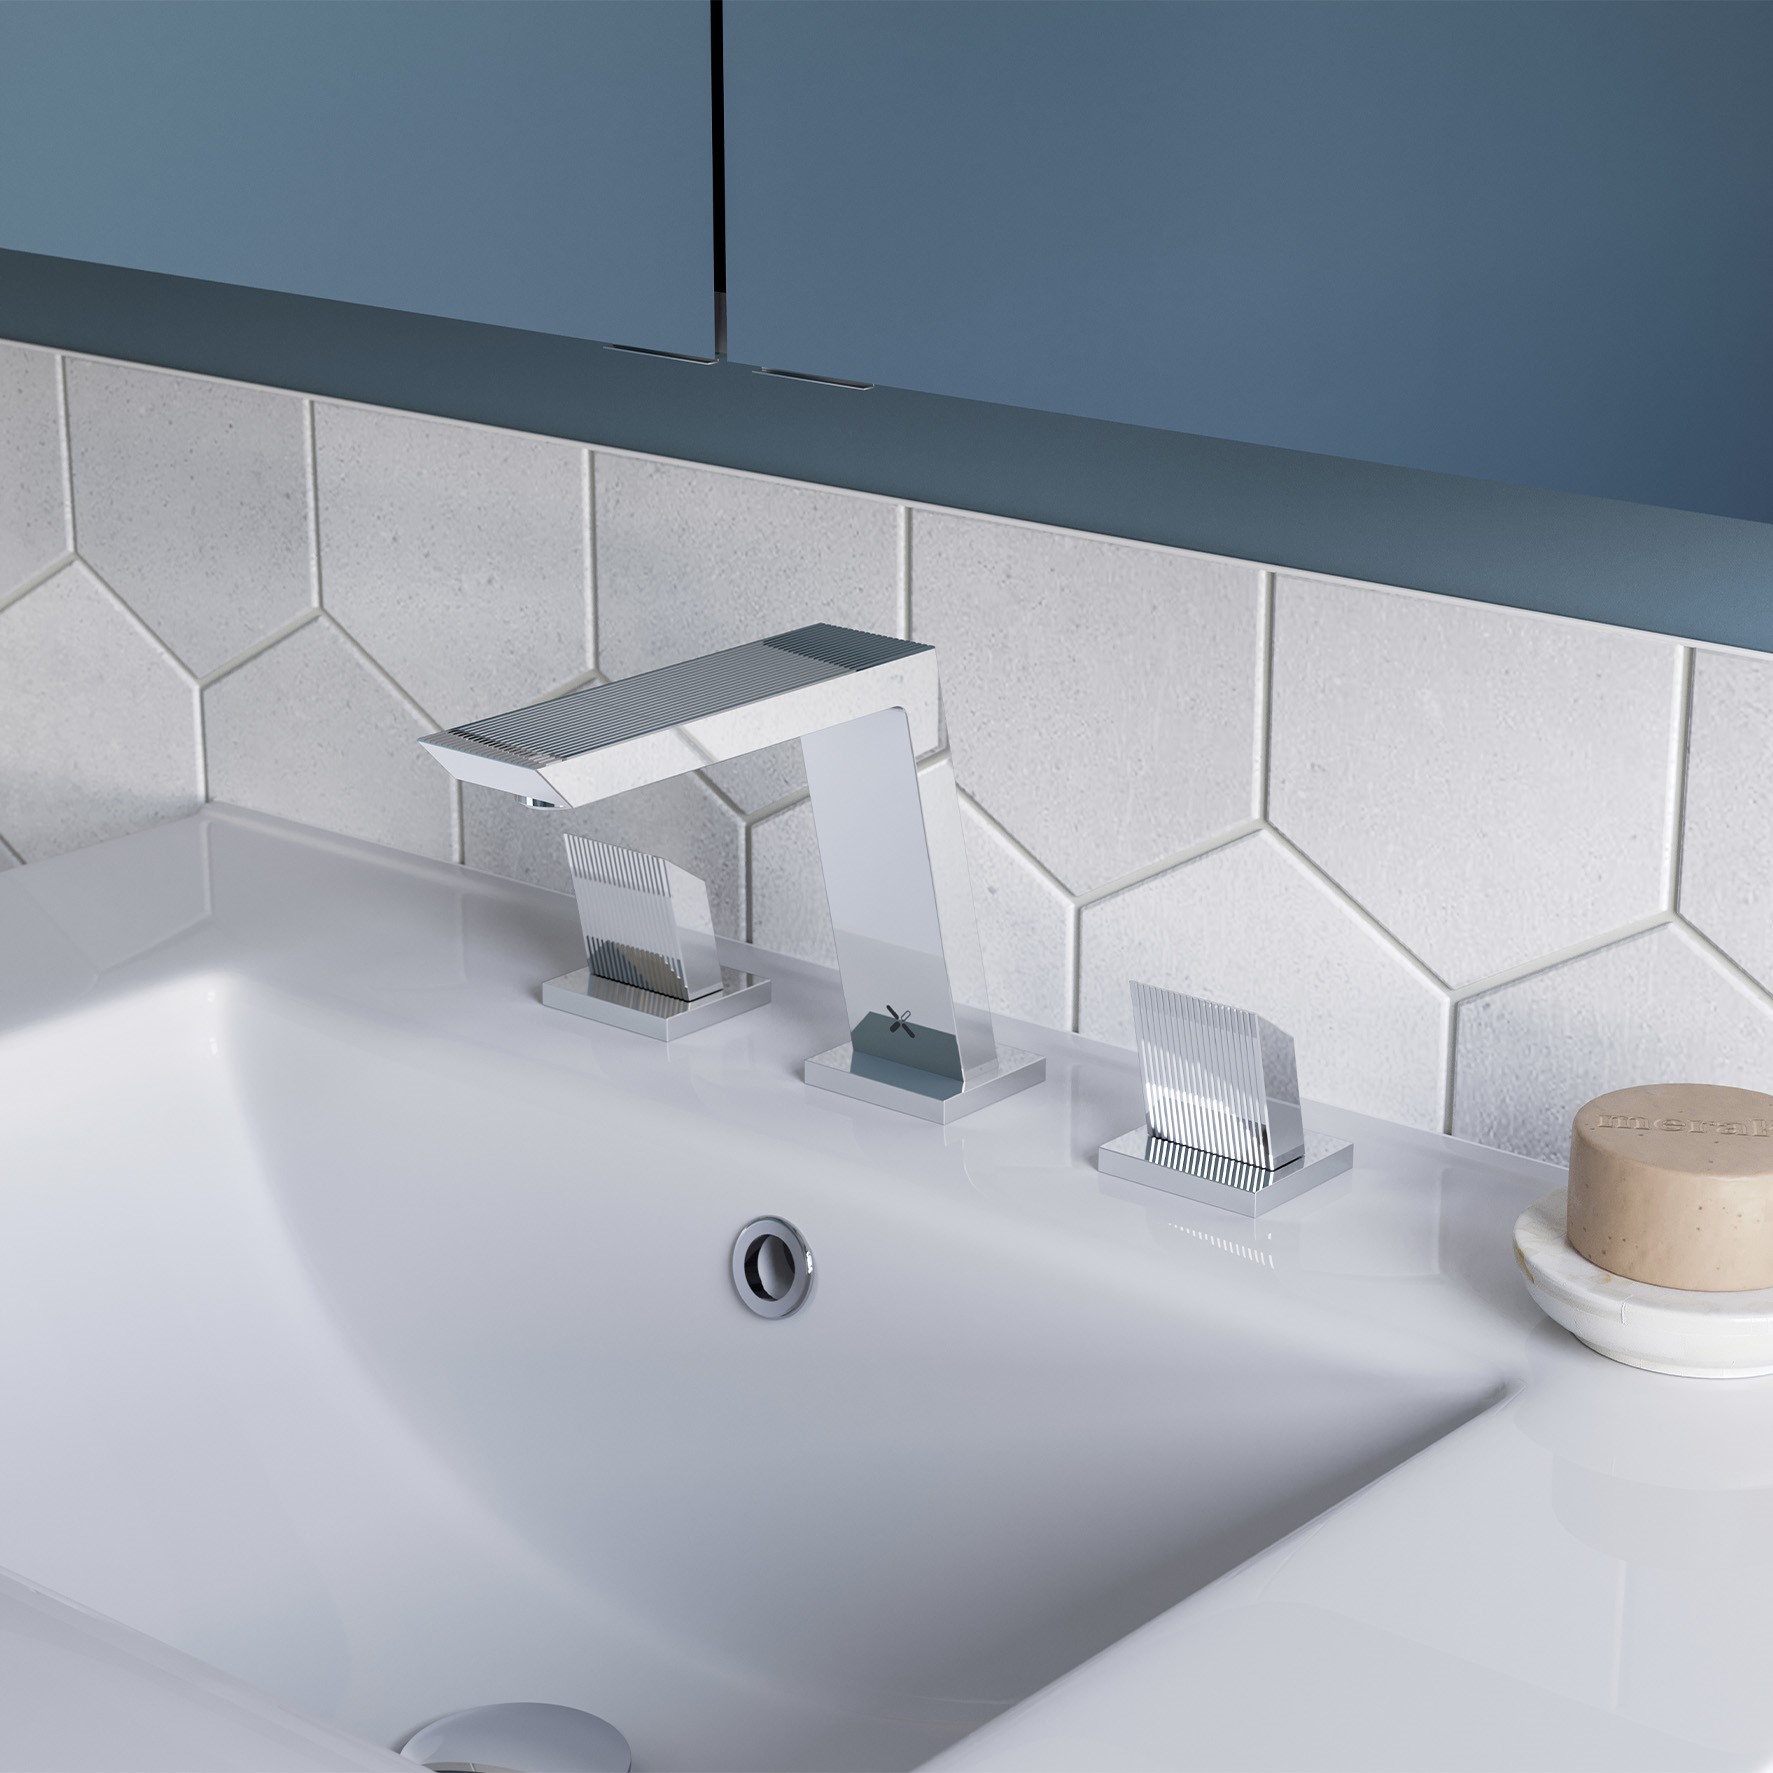 Modern bathroom brassware design with harmony between shape and texture. 